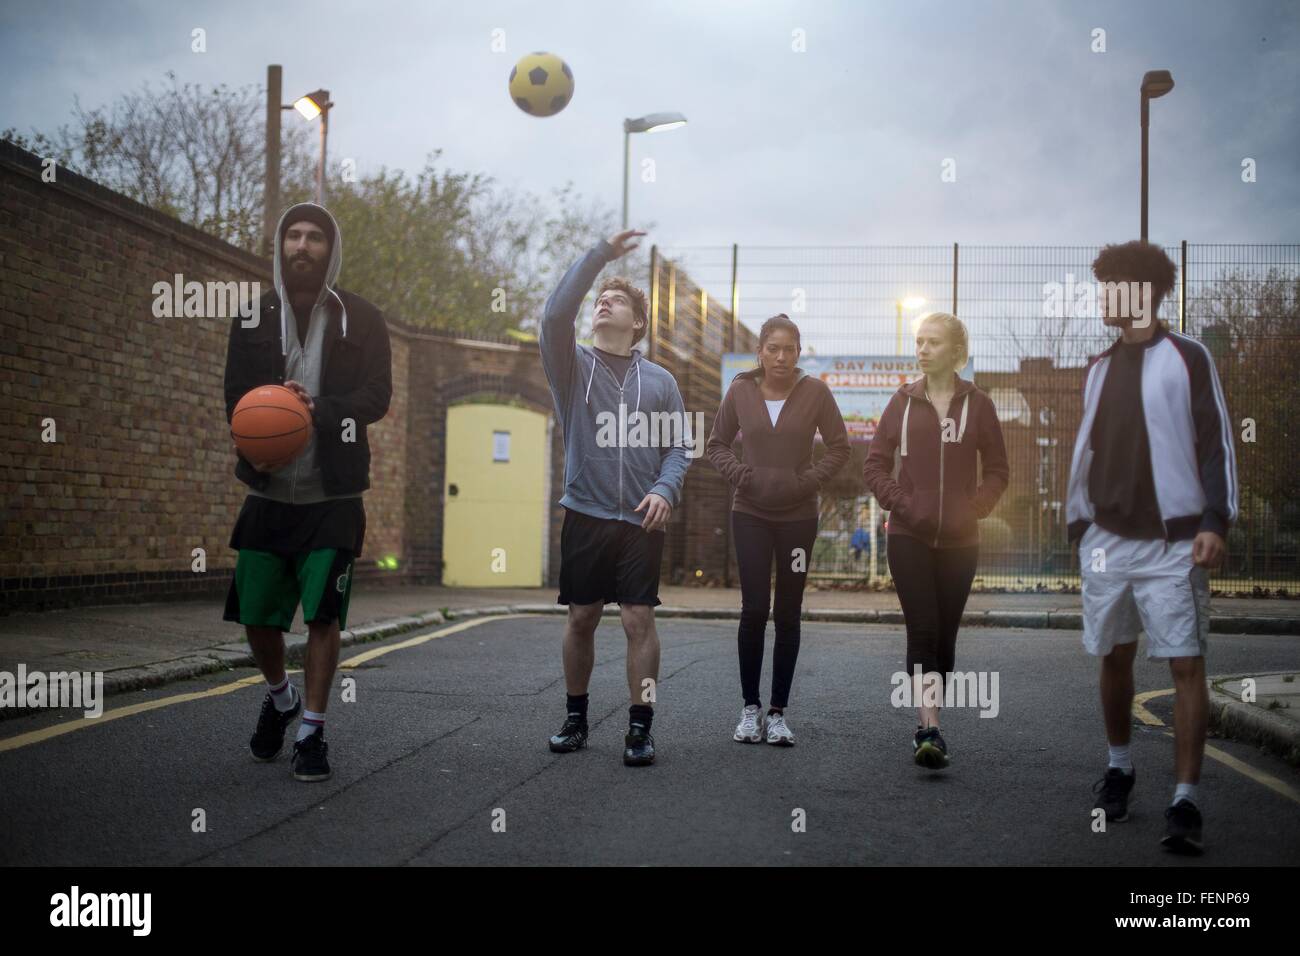 Group of adults walking in road, holding basketball and football Stock Photo